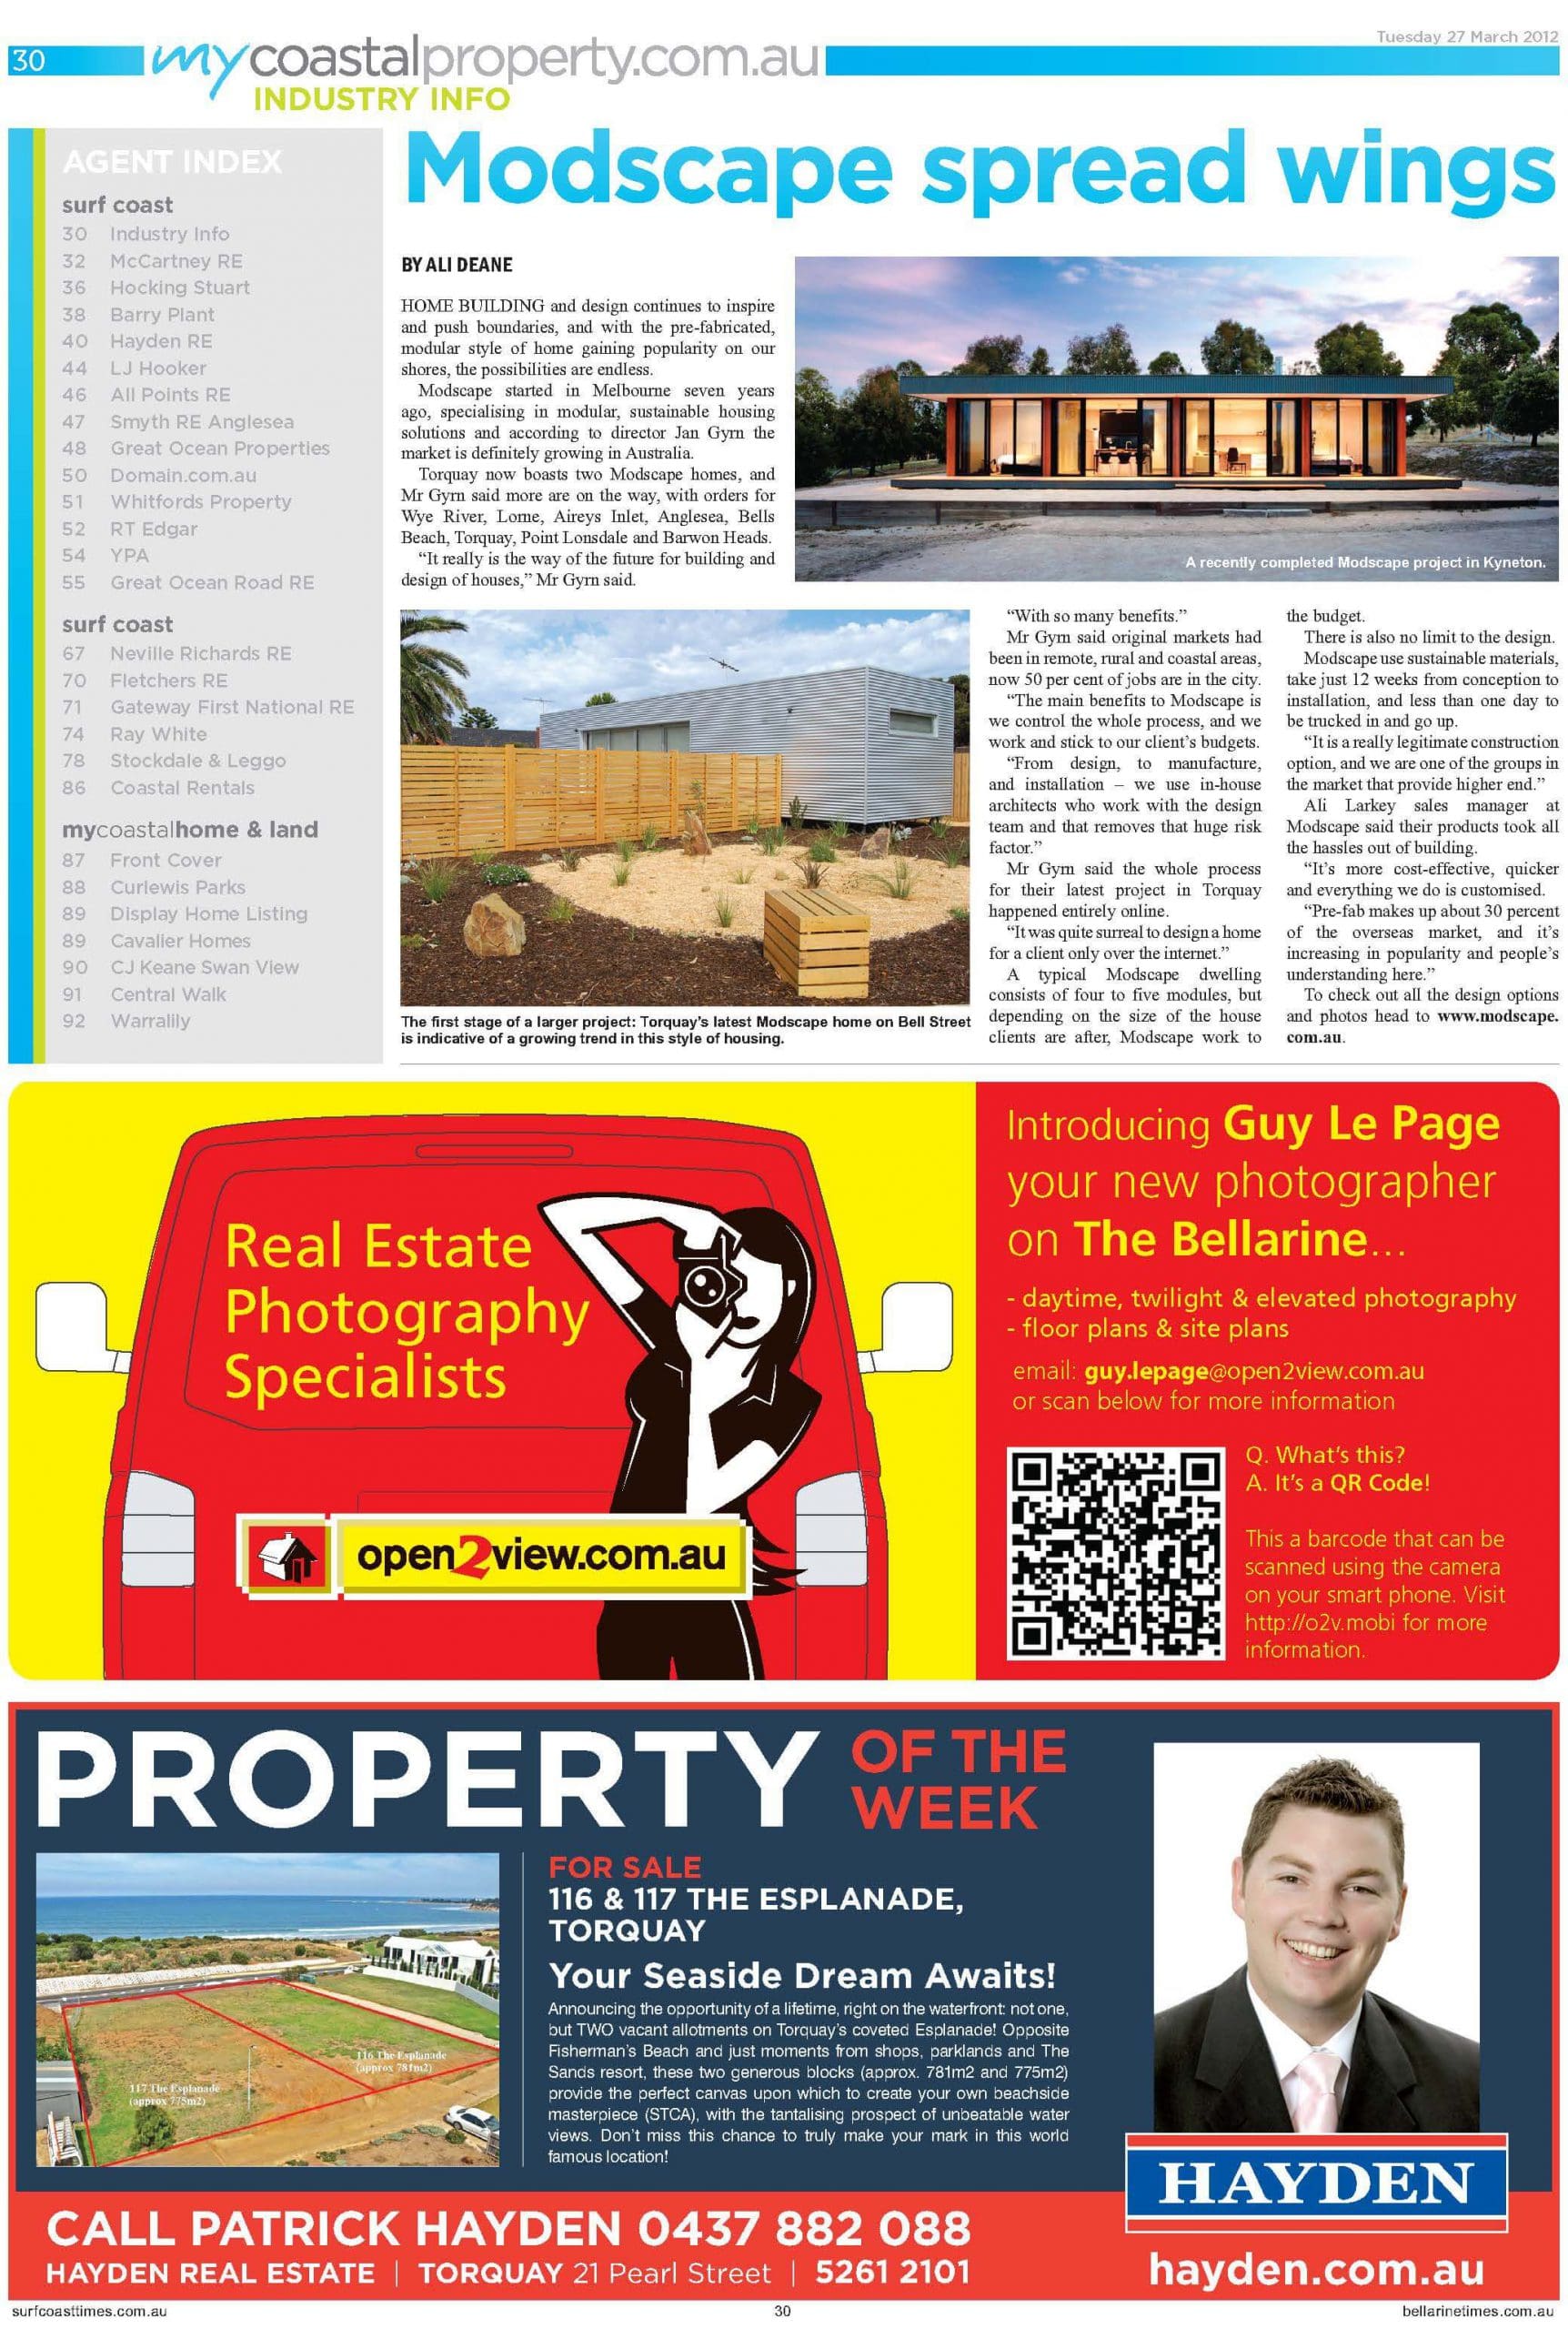 Modscape modular homes featured in the Surfcoast Times